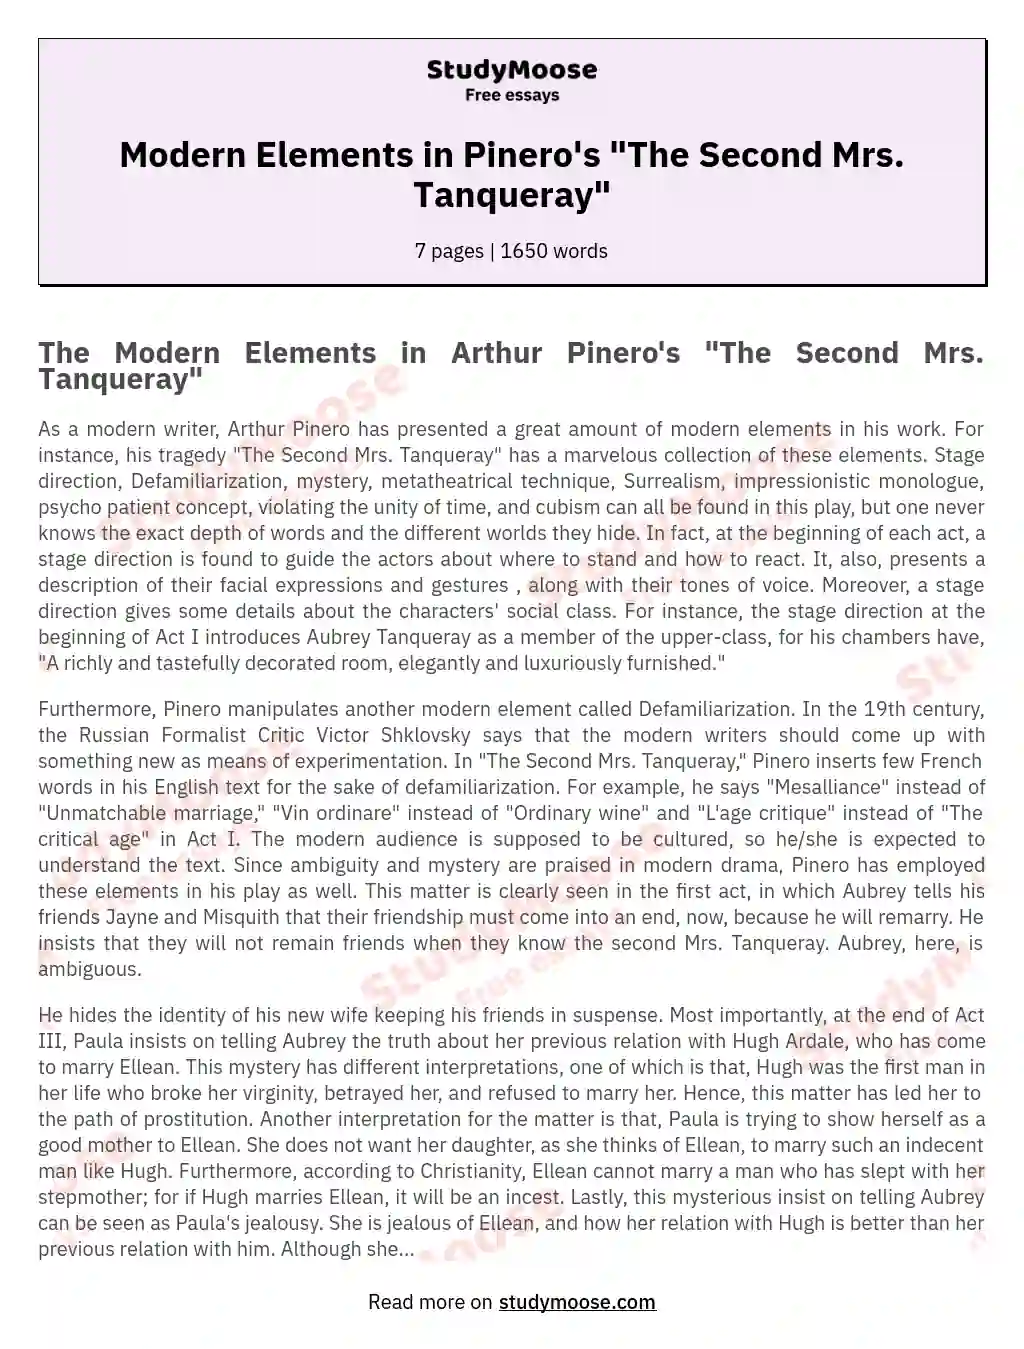 Modern Elements in Pinero's "The Second Mrs. Tanqueray"